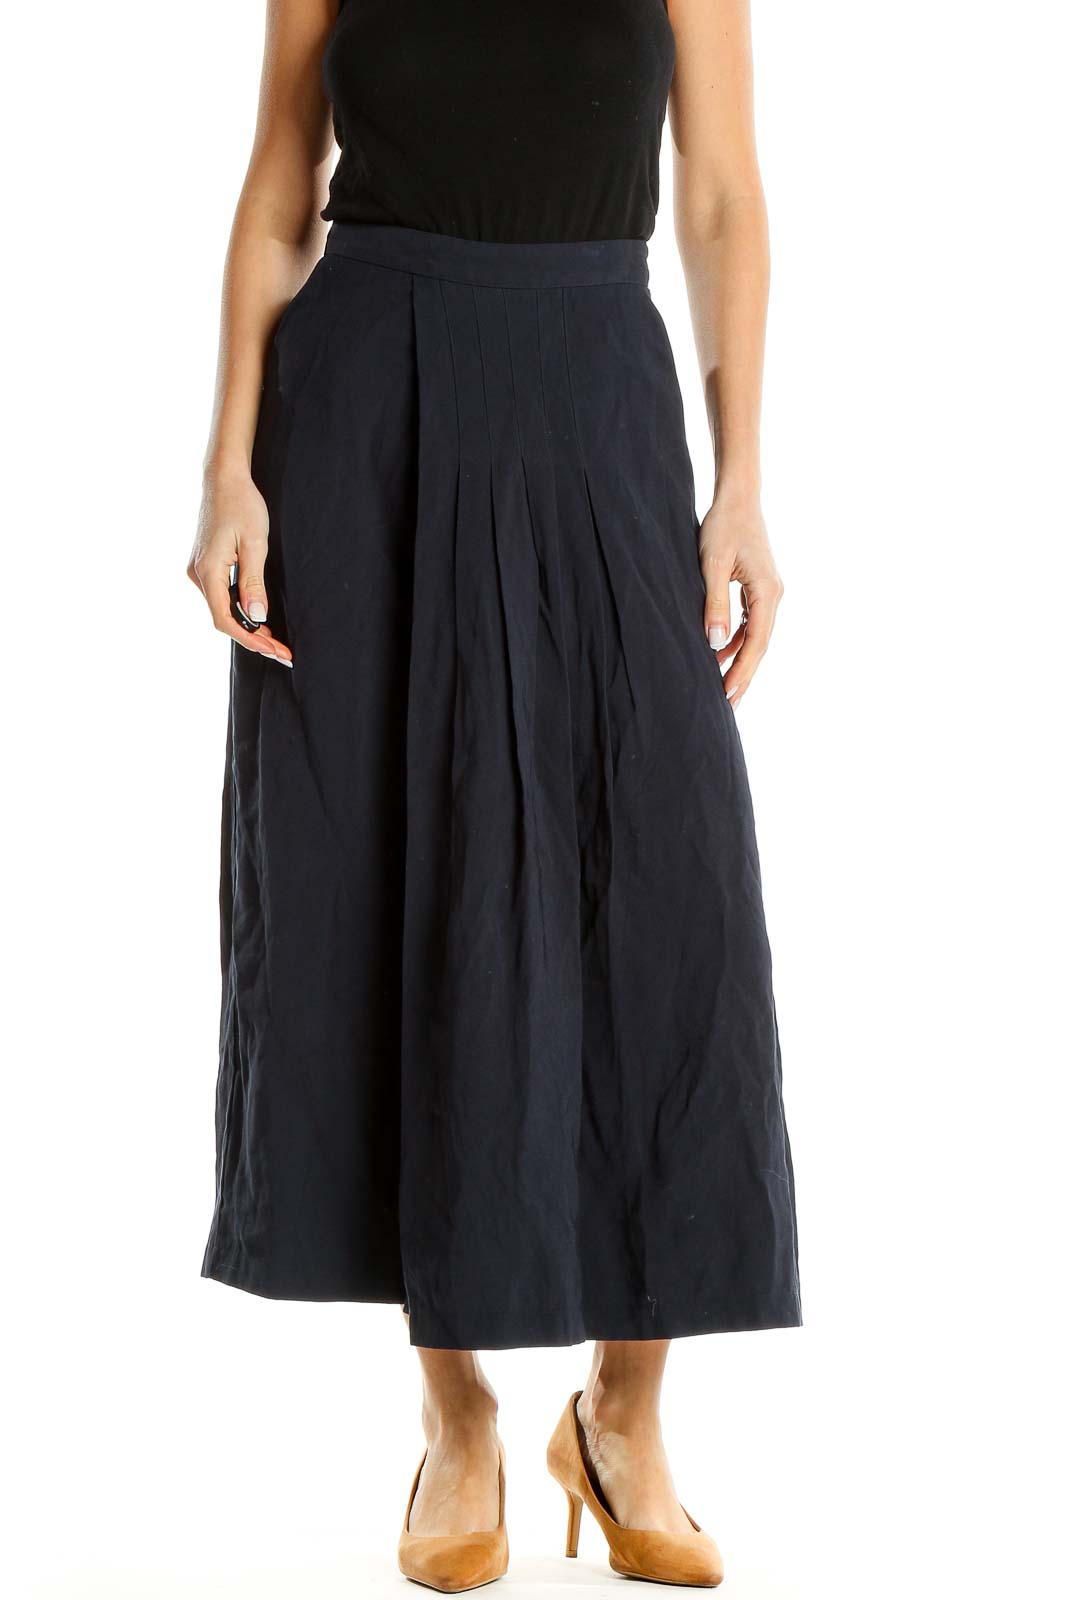 Blue Retro Flared Maxi Skirt Front